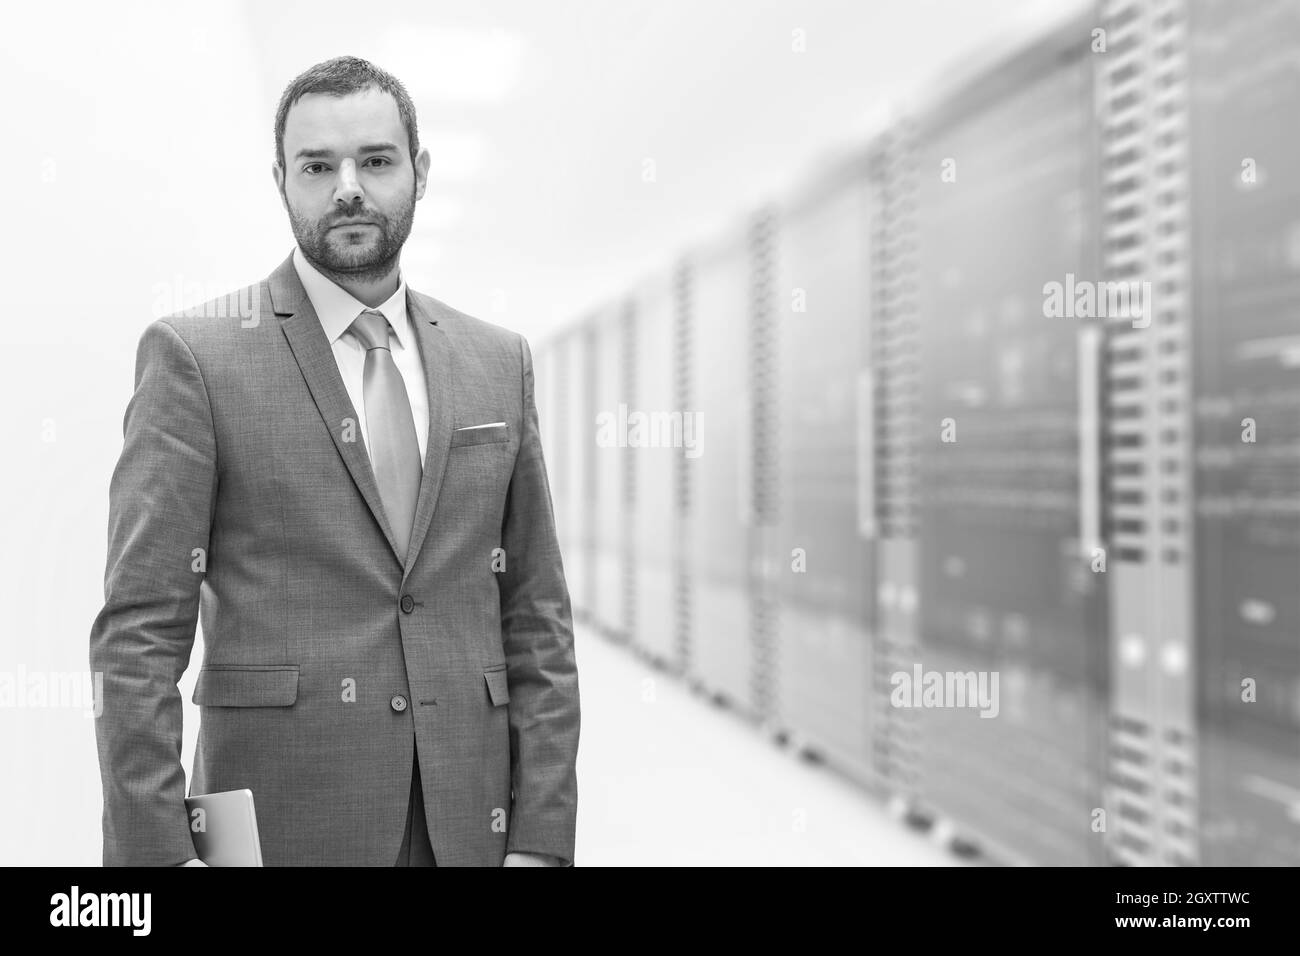 Portrait of young businessman in server room using tablet Stock Photo